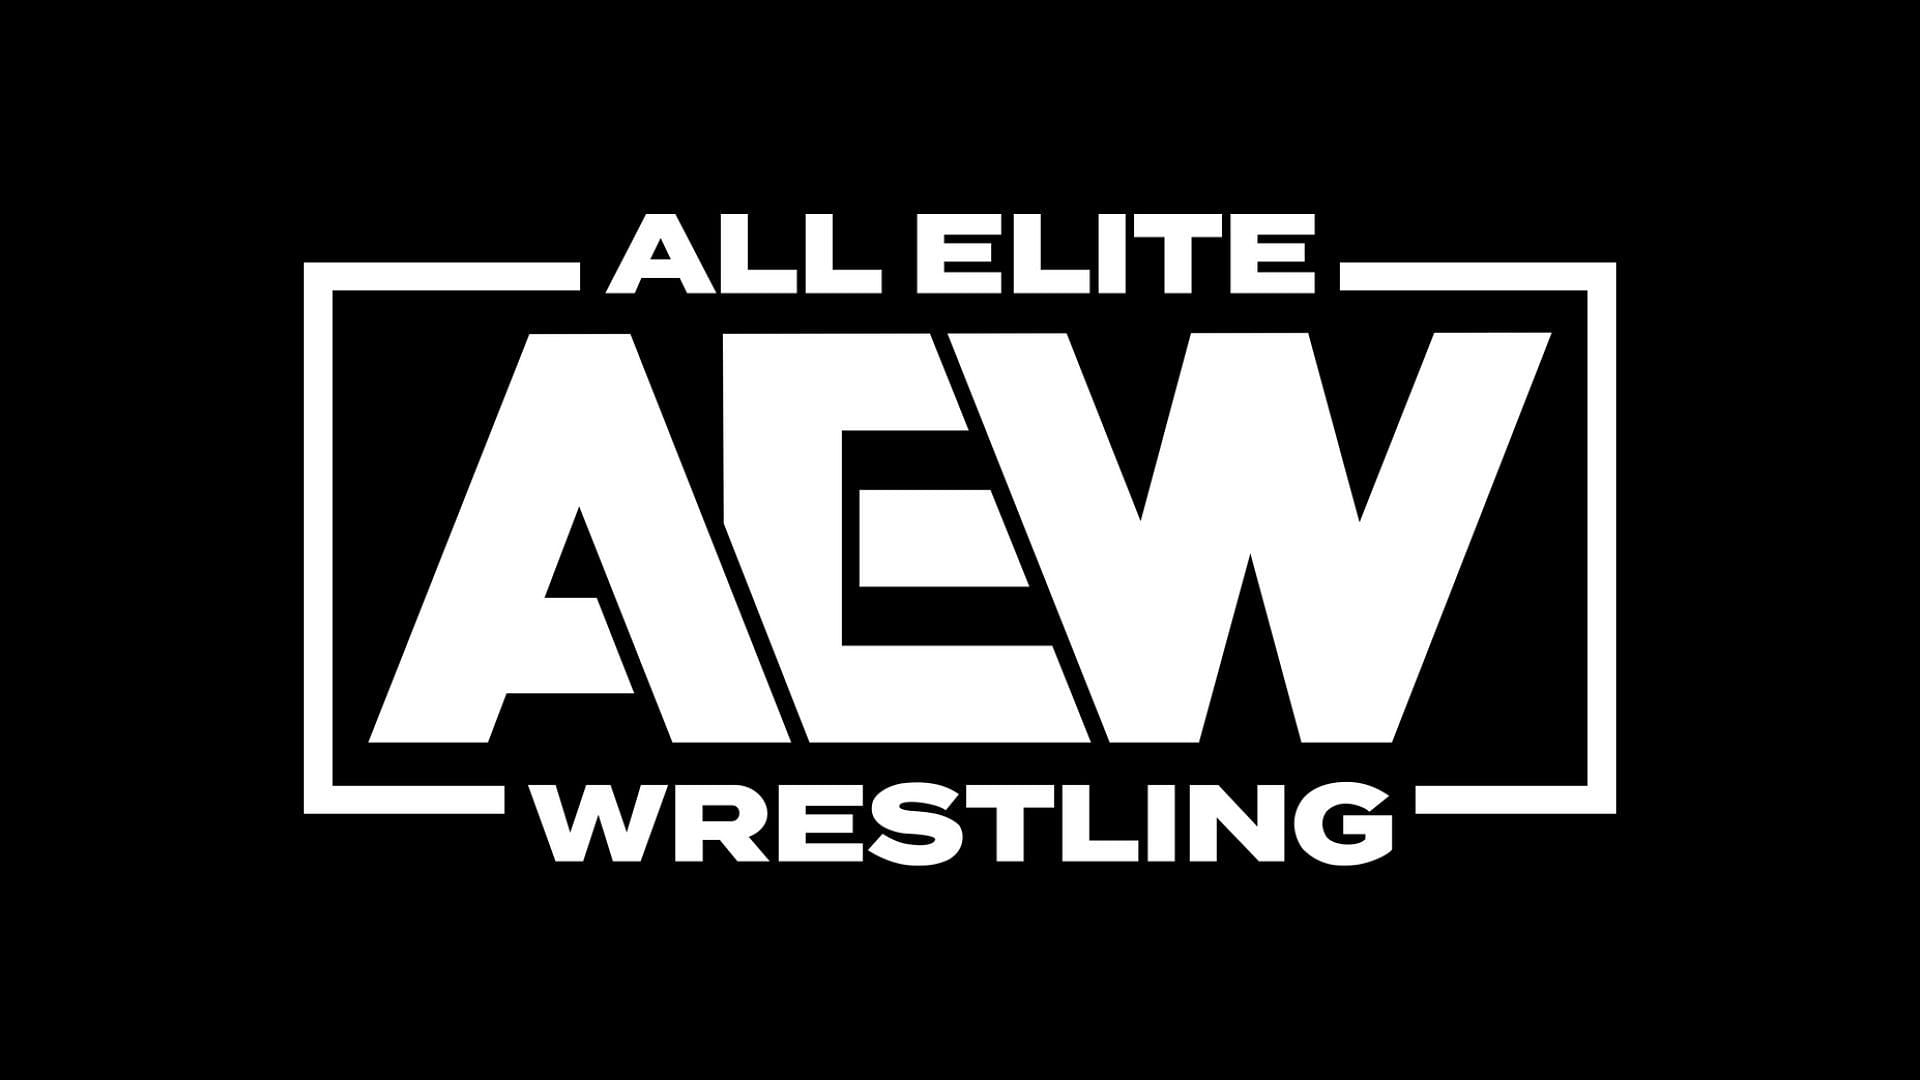 Were fans happy to hear that this star is returning to AEW?